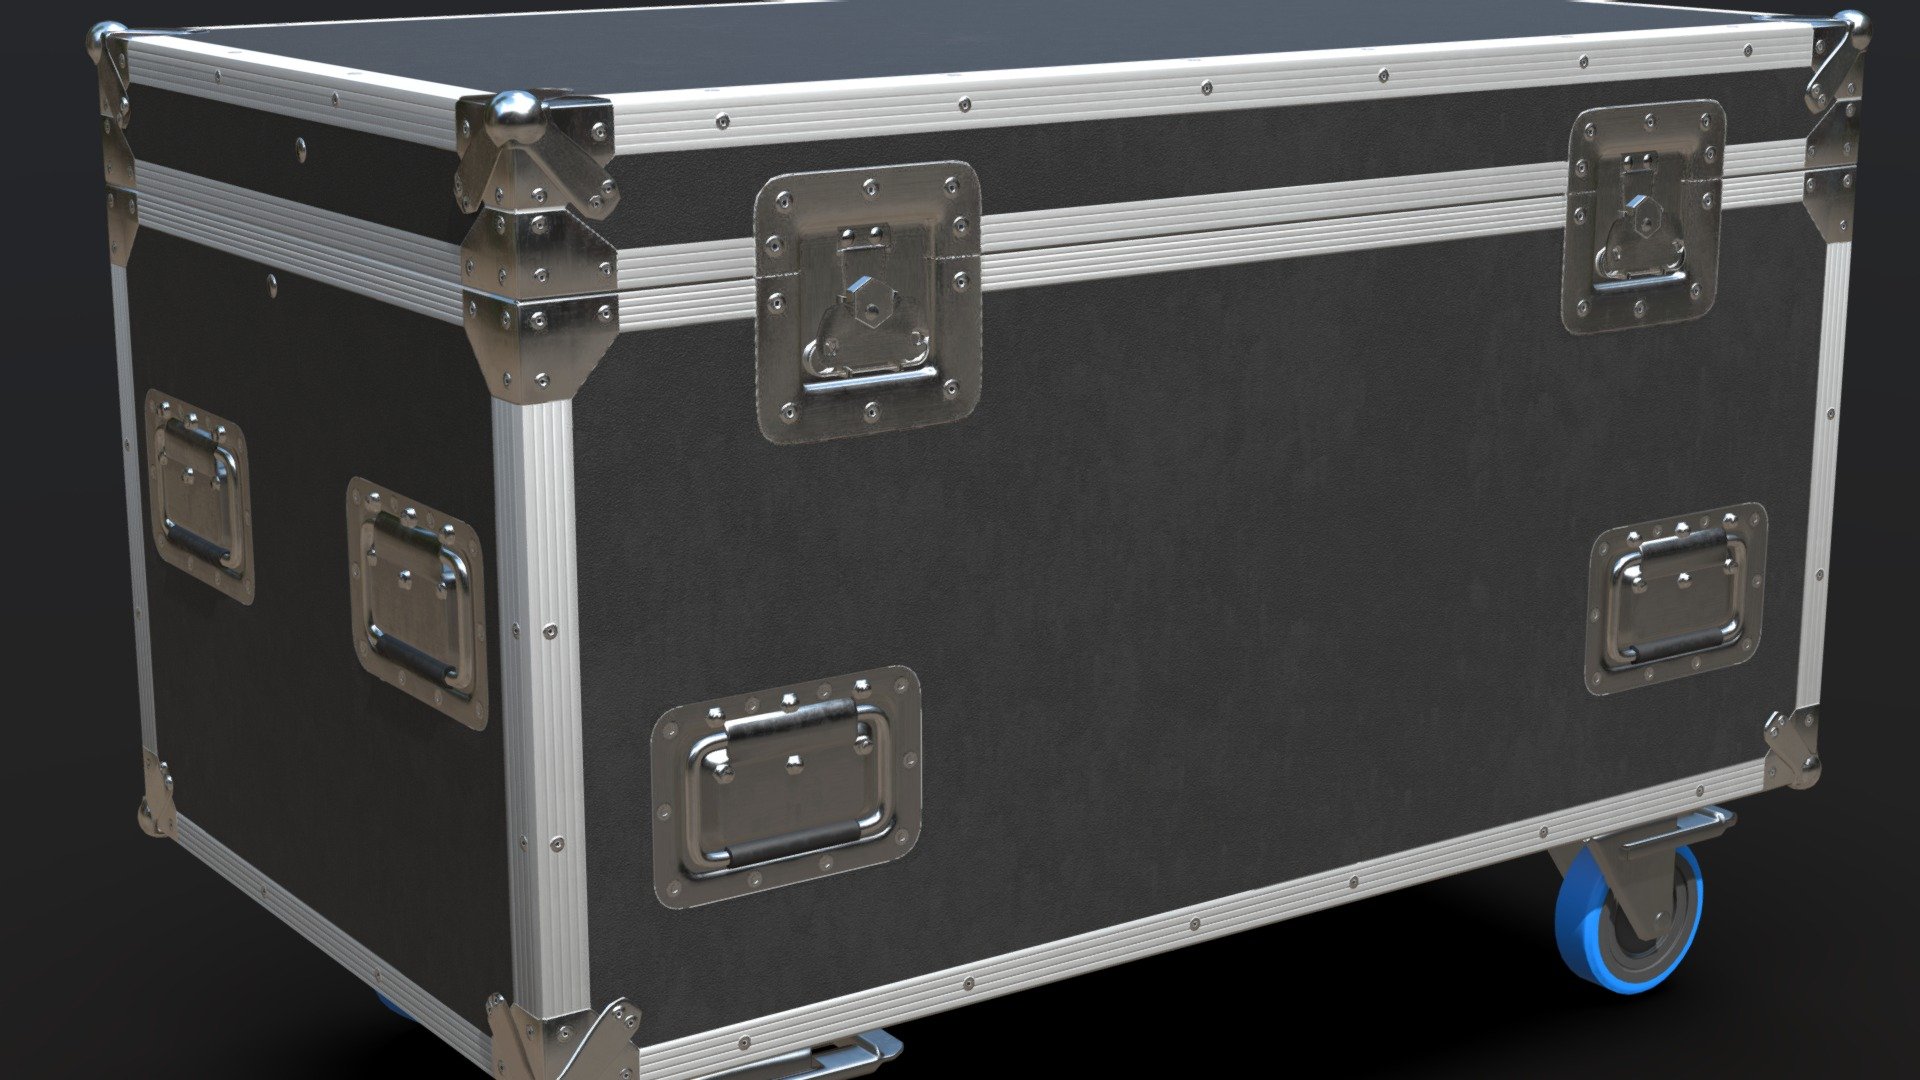 The case and the wheels have different textures. This makes it easier to make them invisible. The wheels are separate objects with a well attached origin point.
Low poly so that it can also be integrated into a game or for architects for visualizations.

When you buy this case you will receive the Blender file too.

Used software: 
Blender and Substance Painter.

PBR textures for metal-rough workflow 3d model